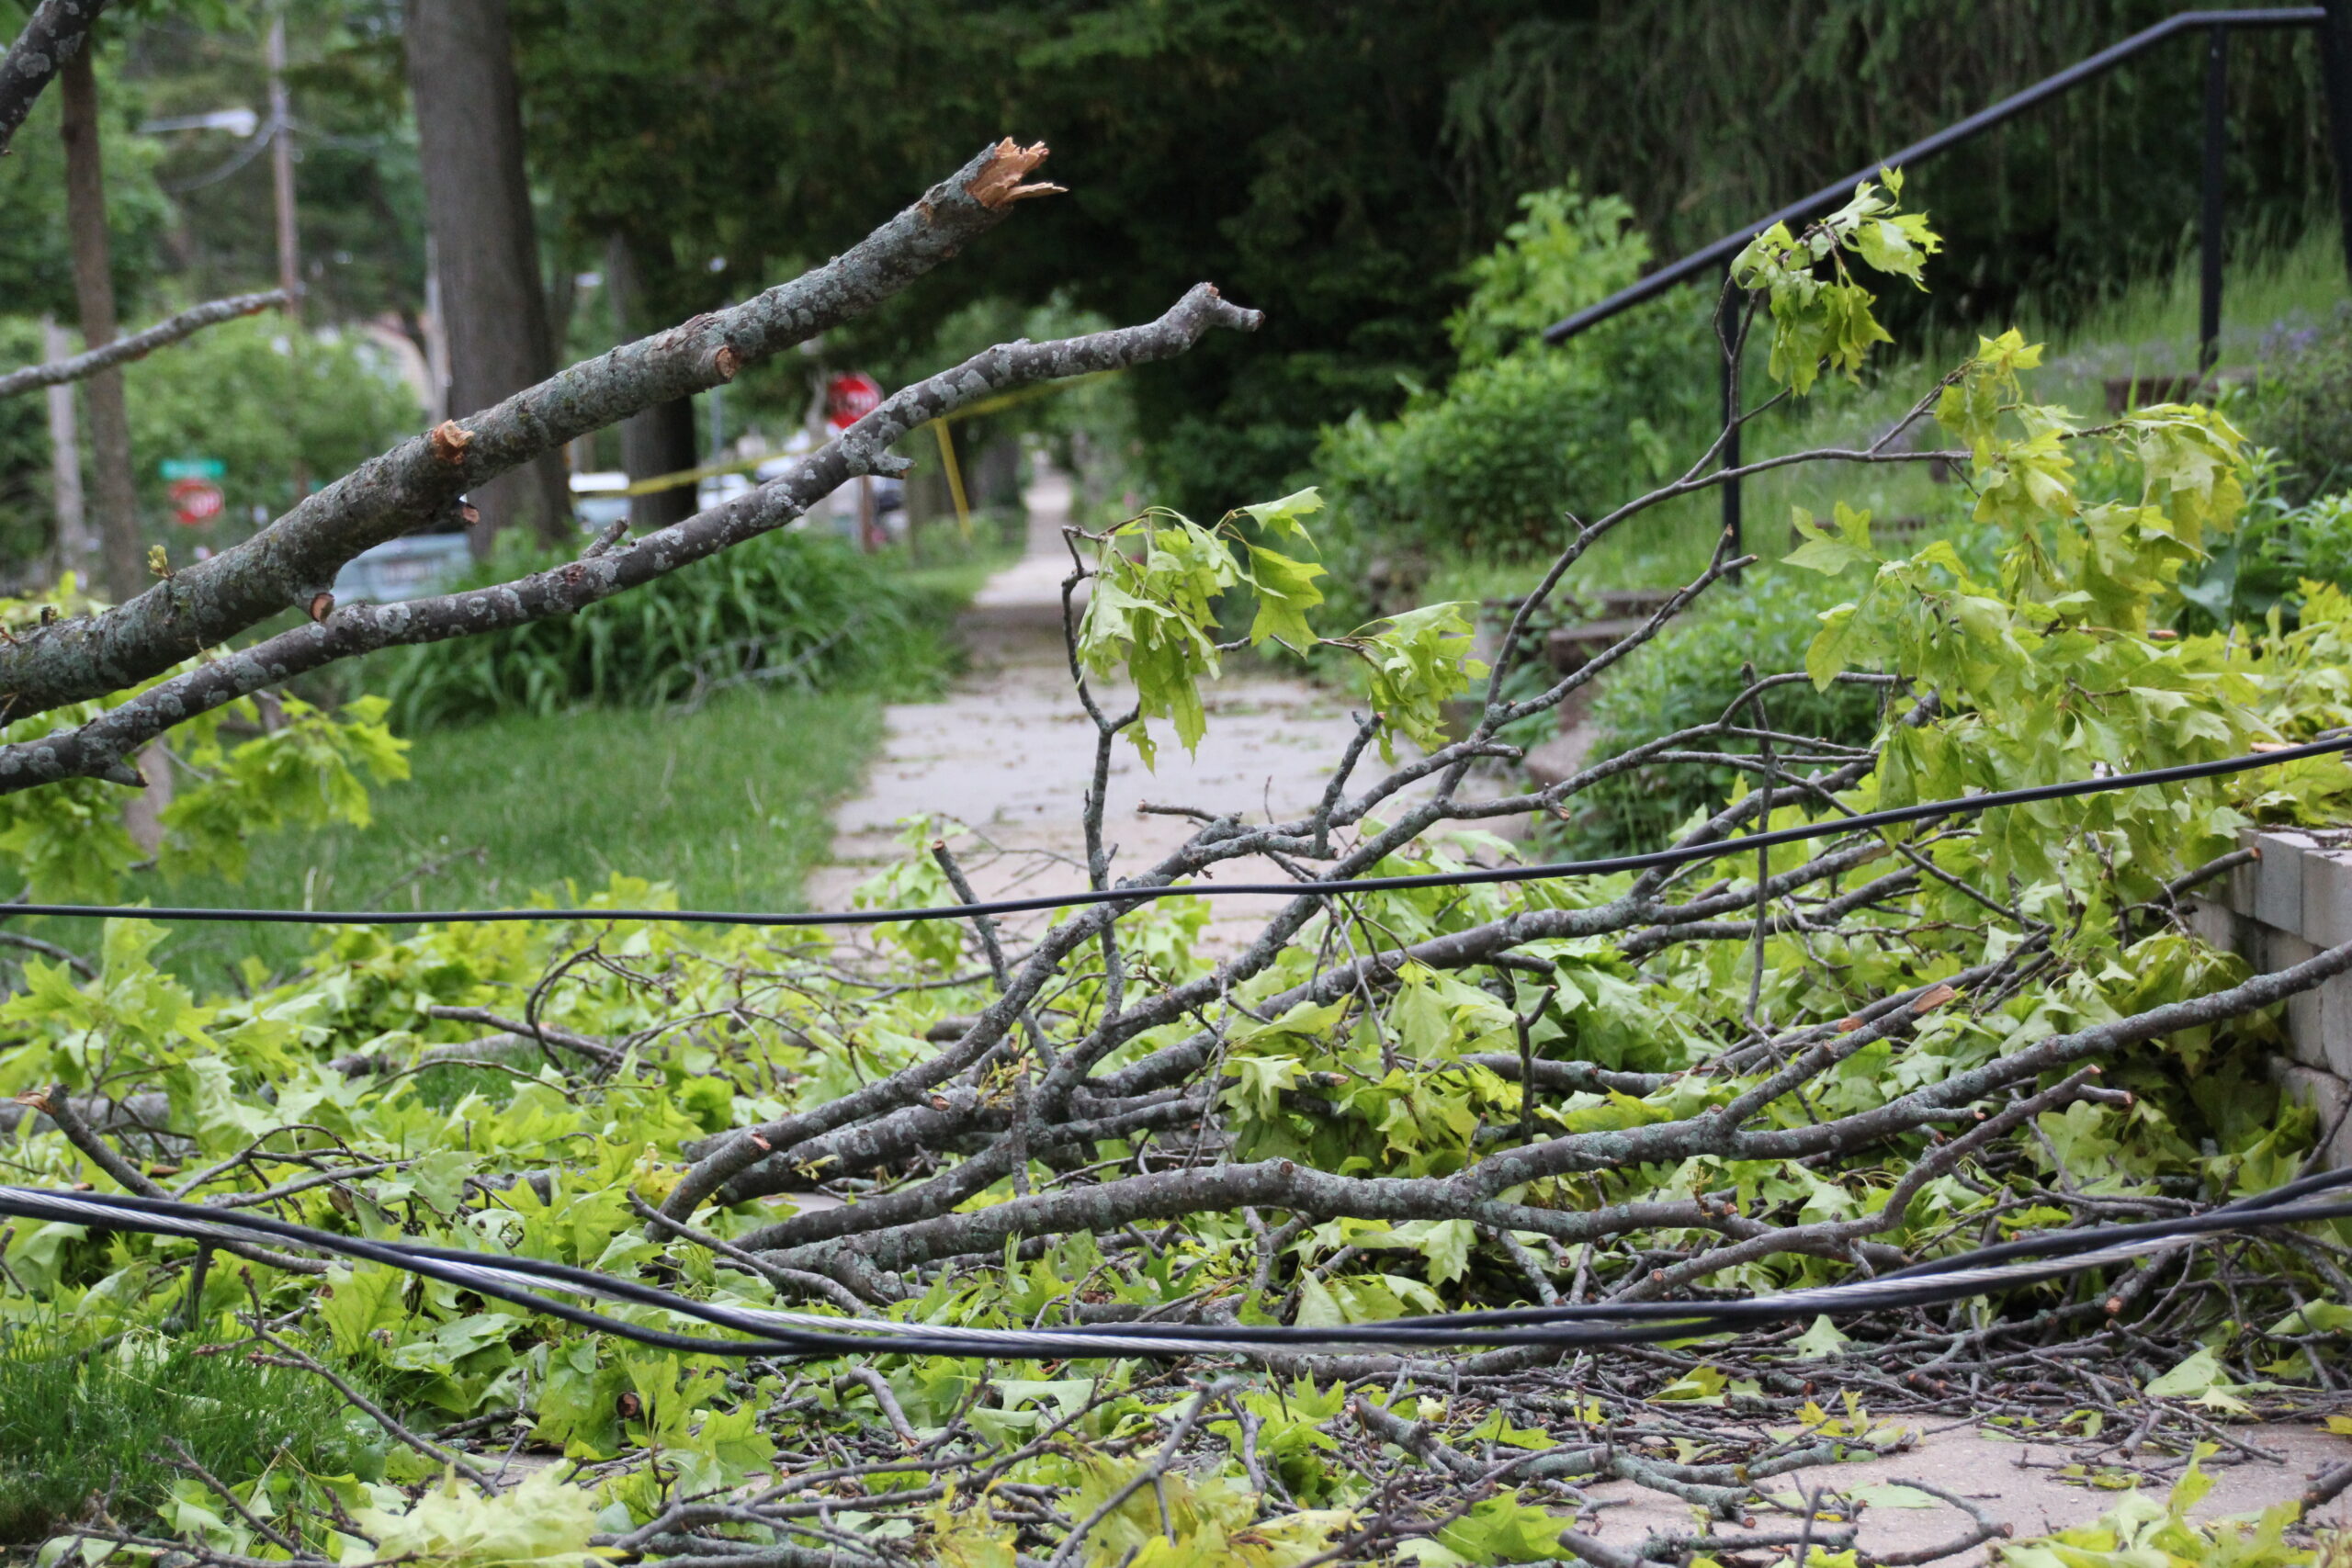 Tens of thousands without power, schools canceled after storms